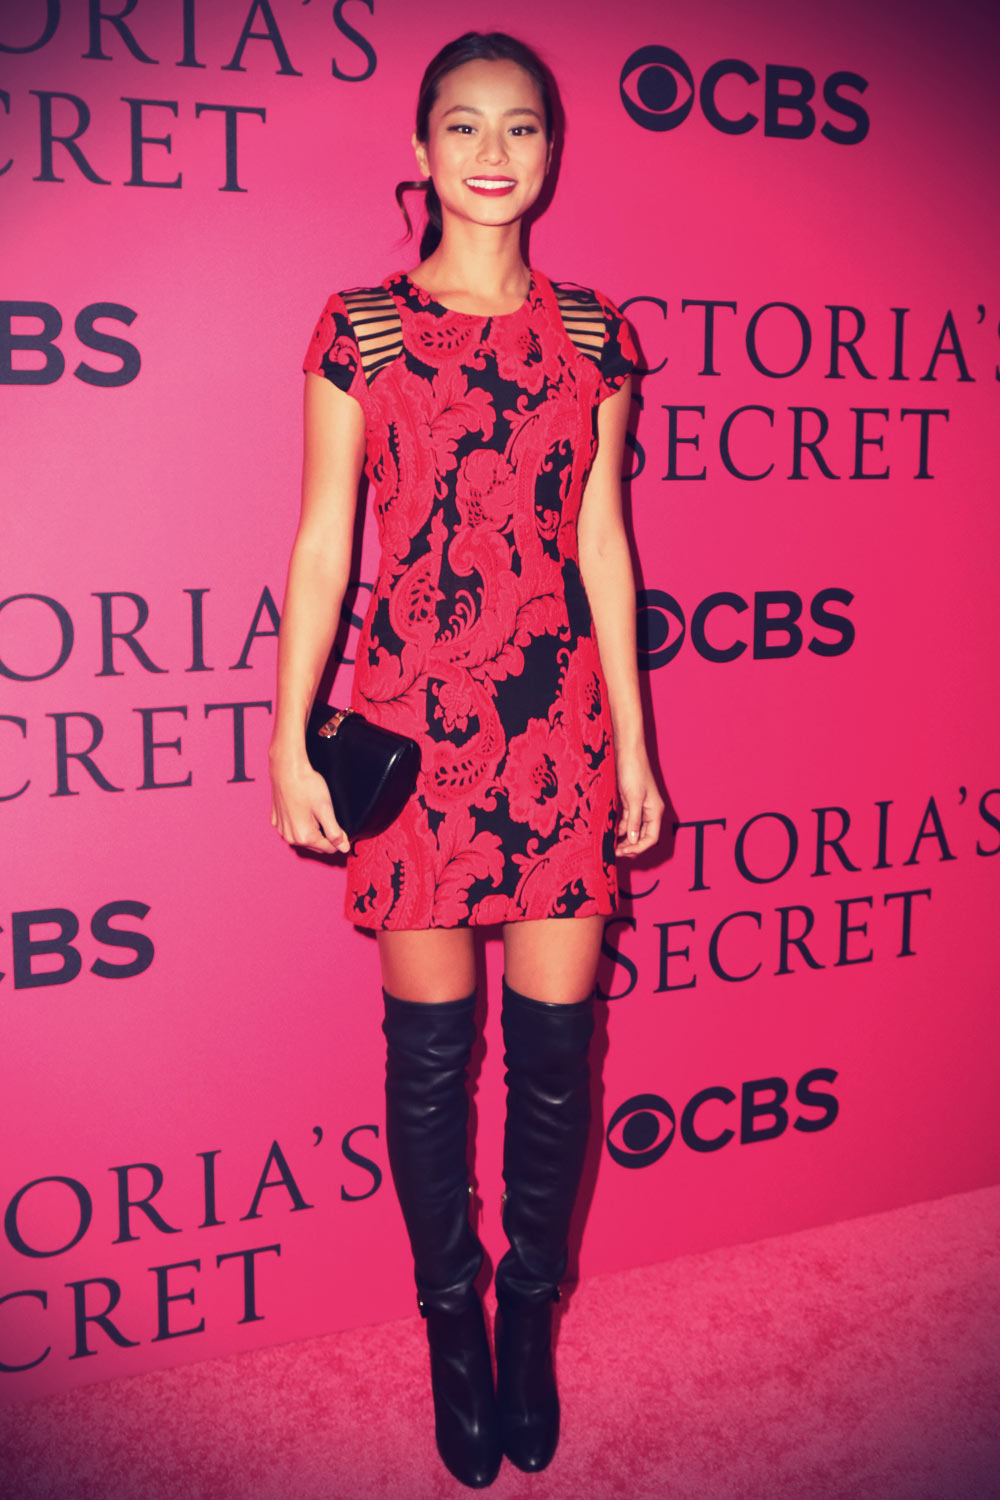 Jamie Chung 2013 Victoria’s Secret Fashion Show After Party